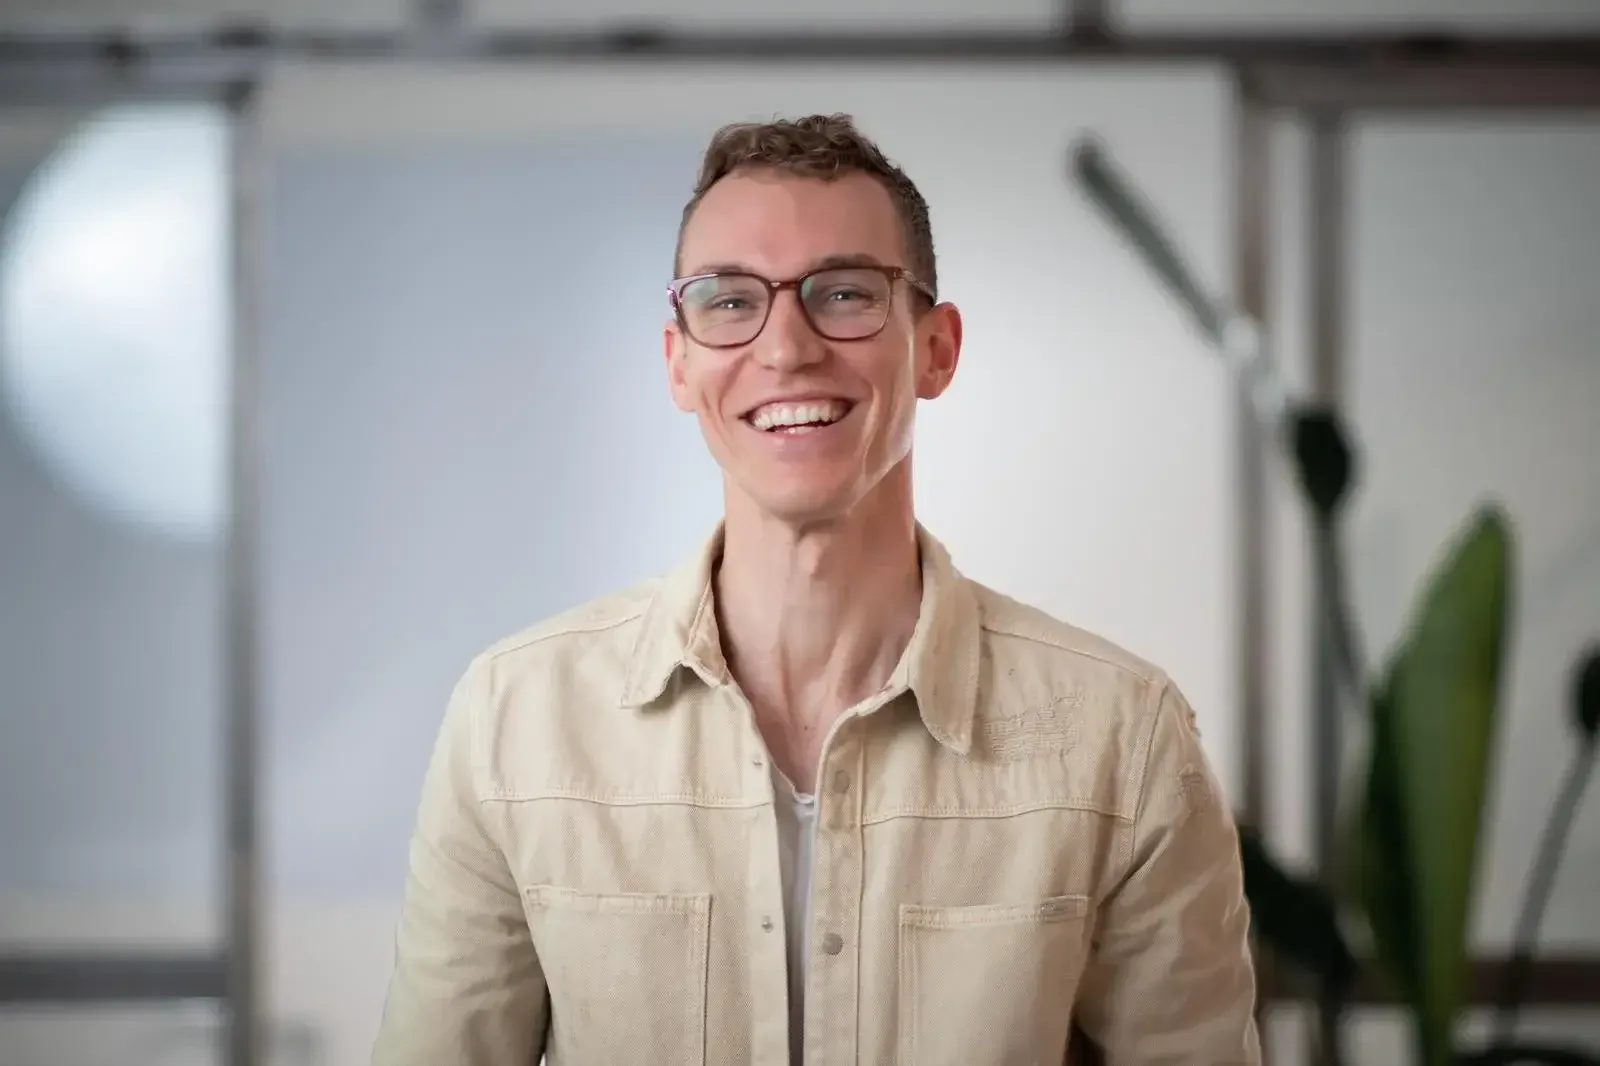 Laughing Man with glasses and a beige button down laughing into the camera